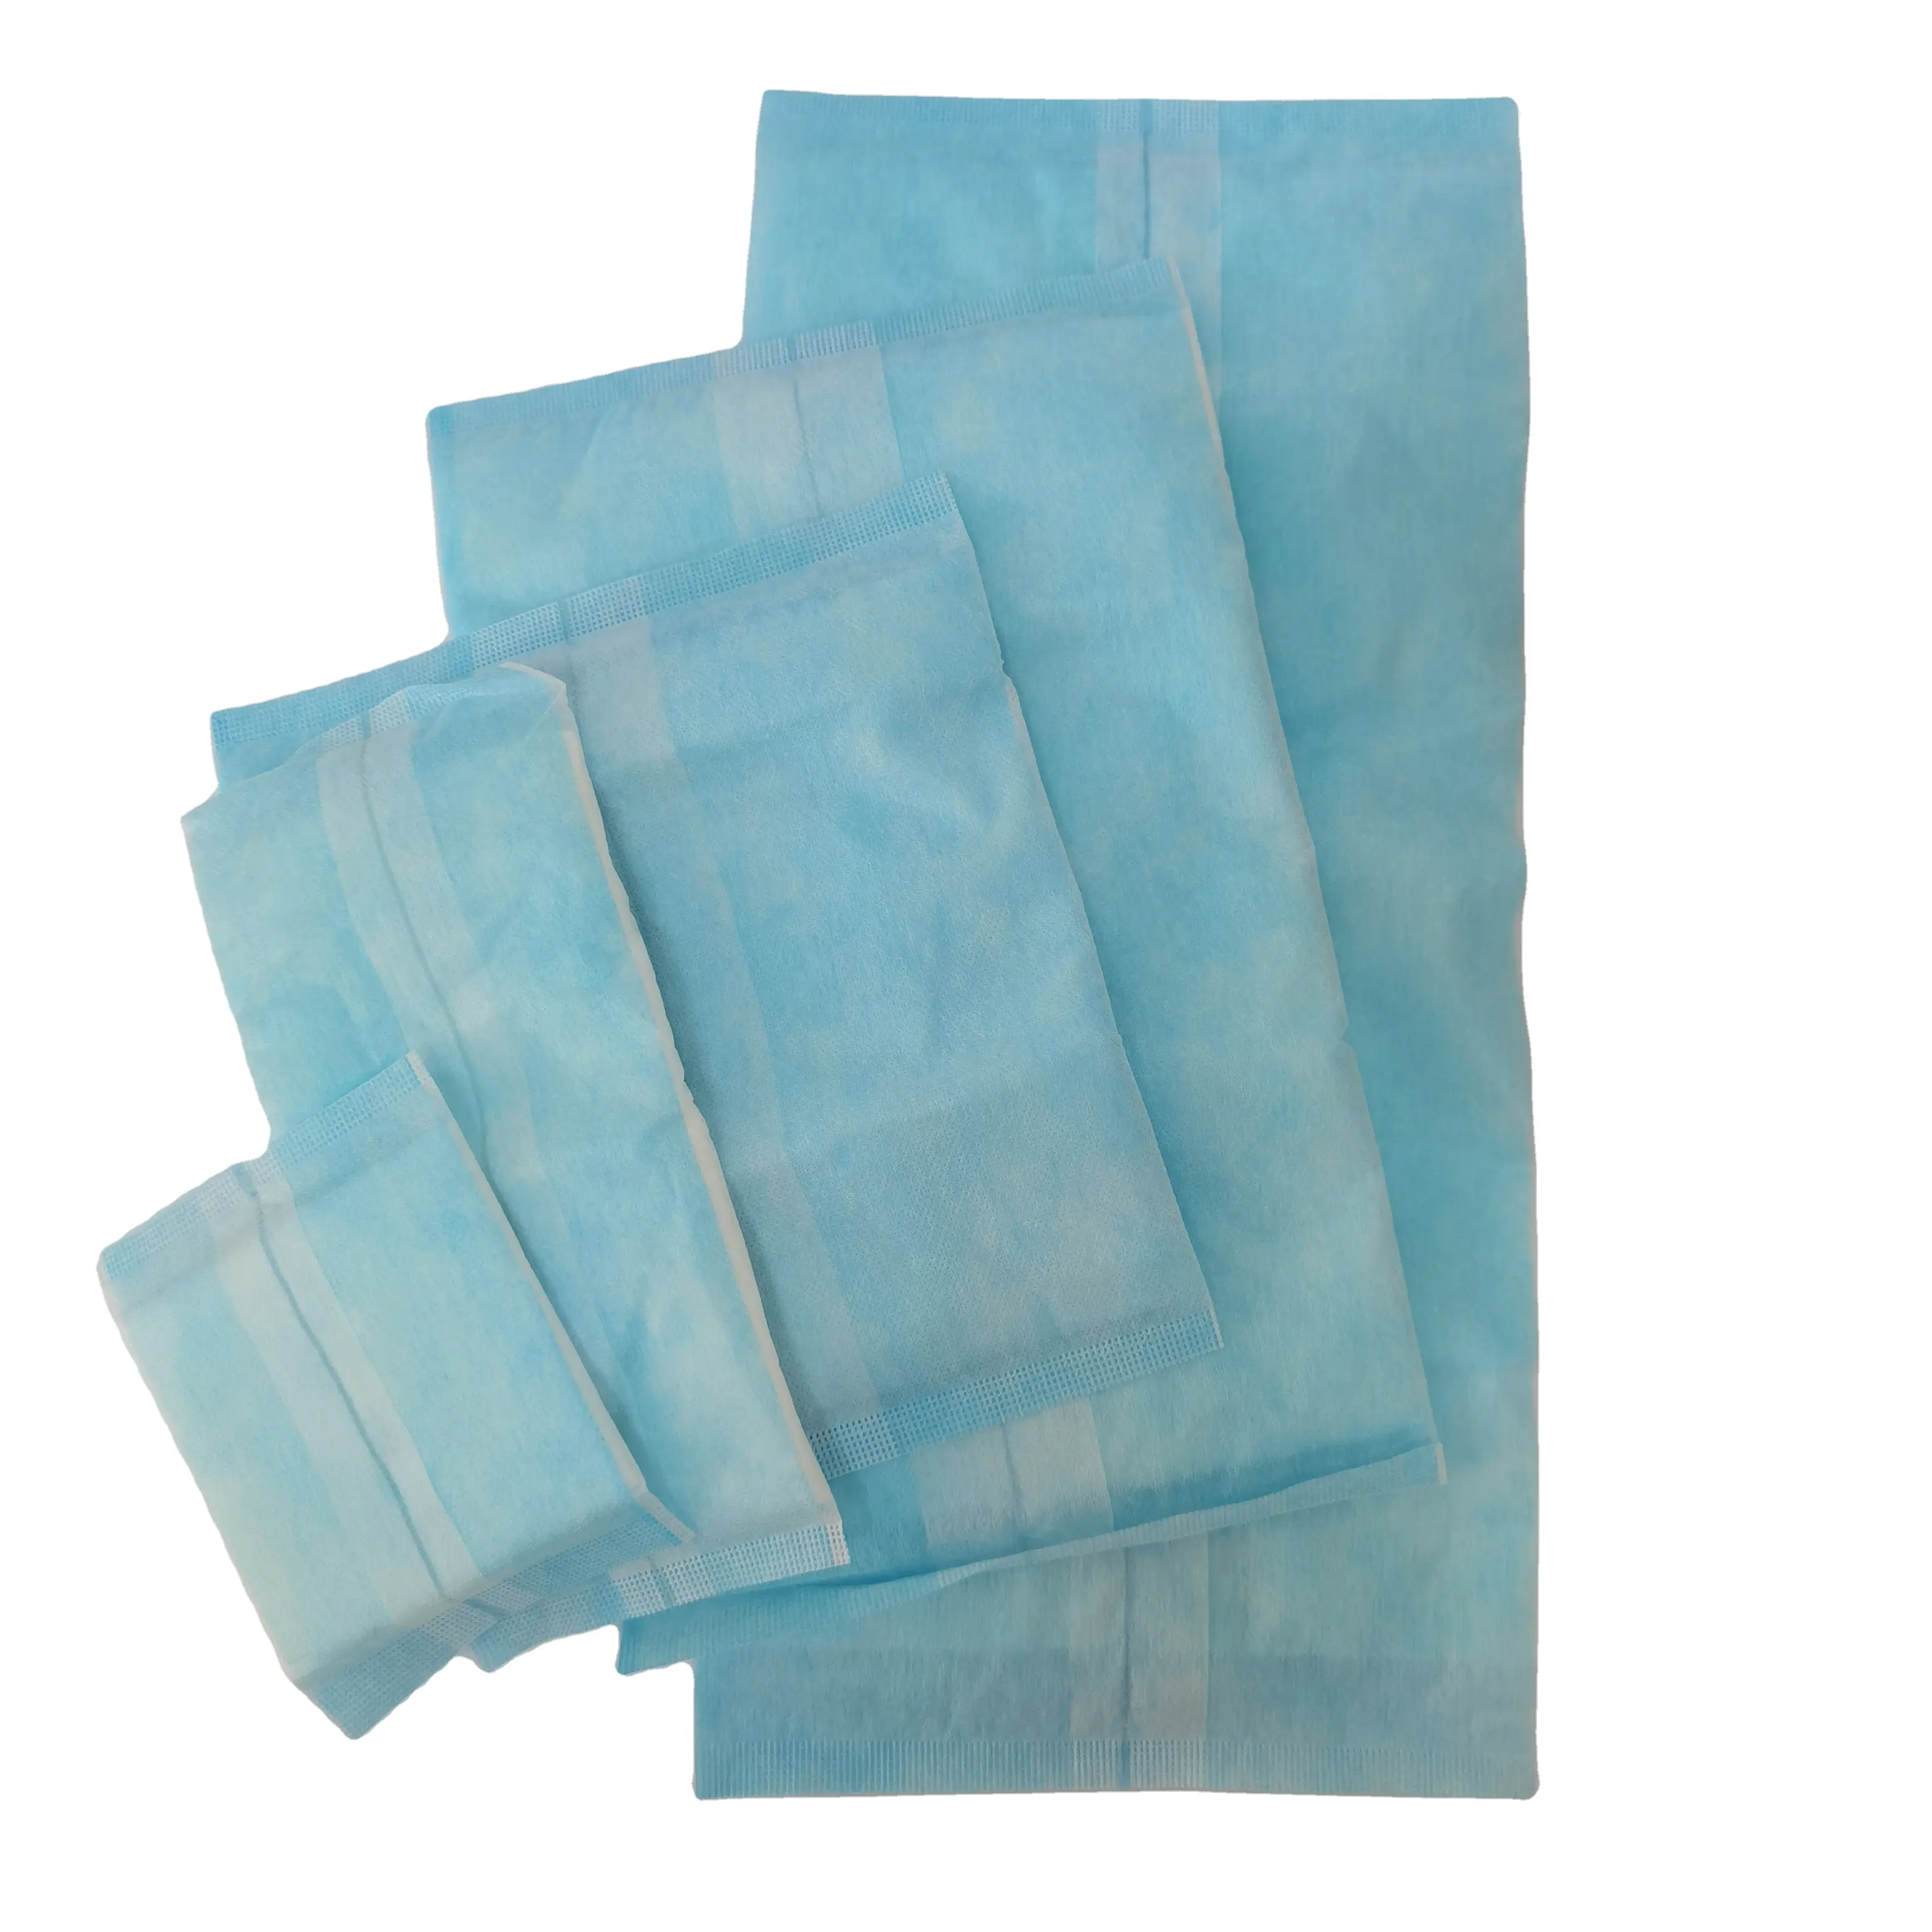 New Type Superior Quality Made Sterile Medical Absorbent Pad